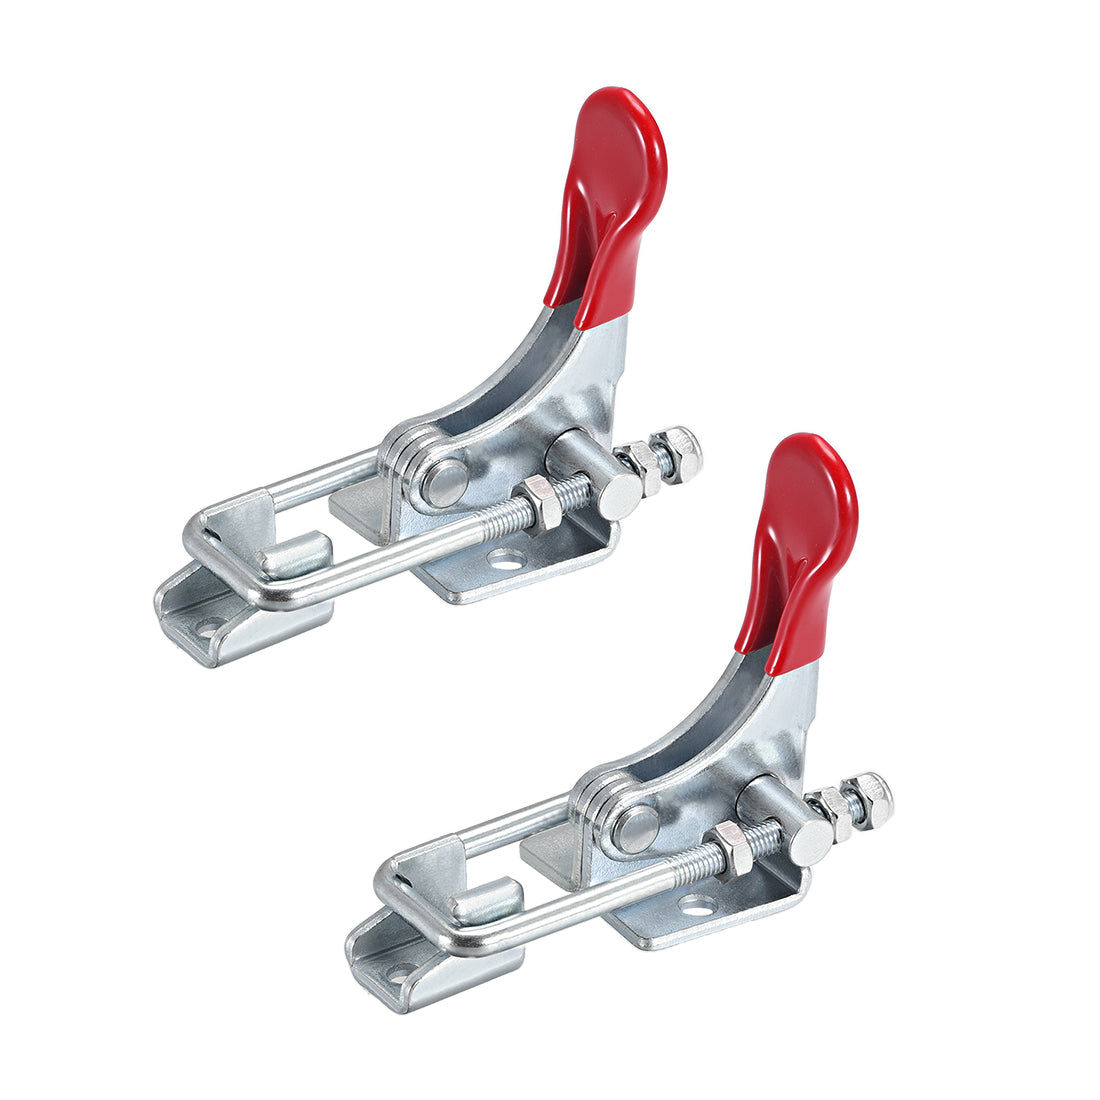 uxcell Uxcell 2 Pcs Hand Tool Latch Action Toggle Clamp Quick Release Clamp 700 lbs/320kg Holding Capacity